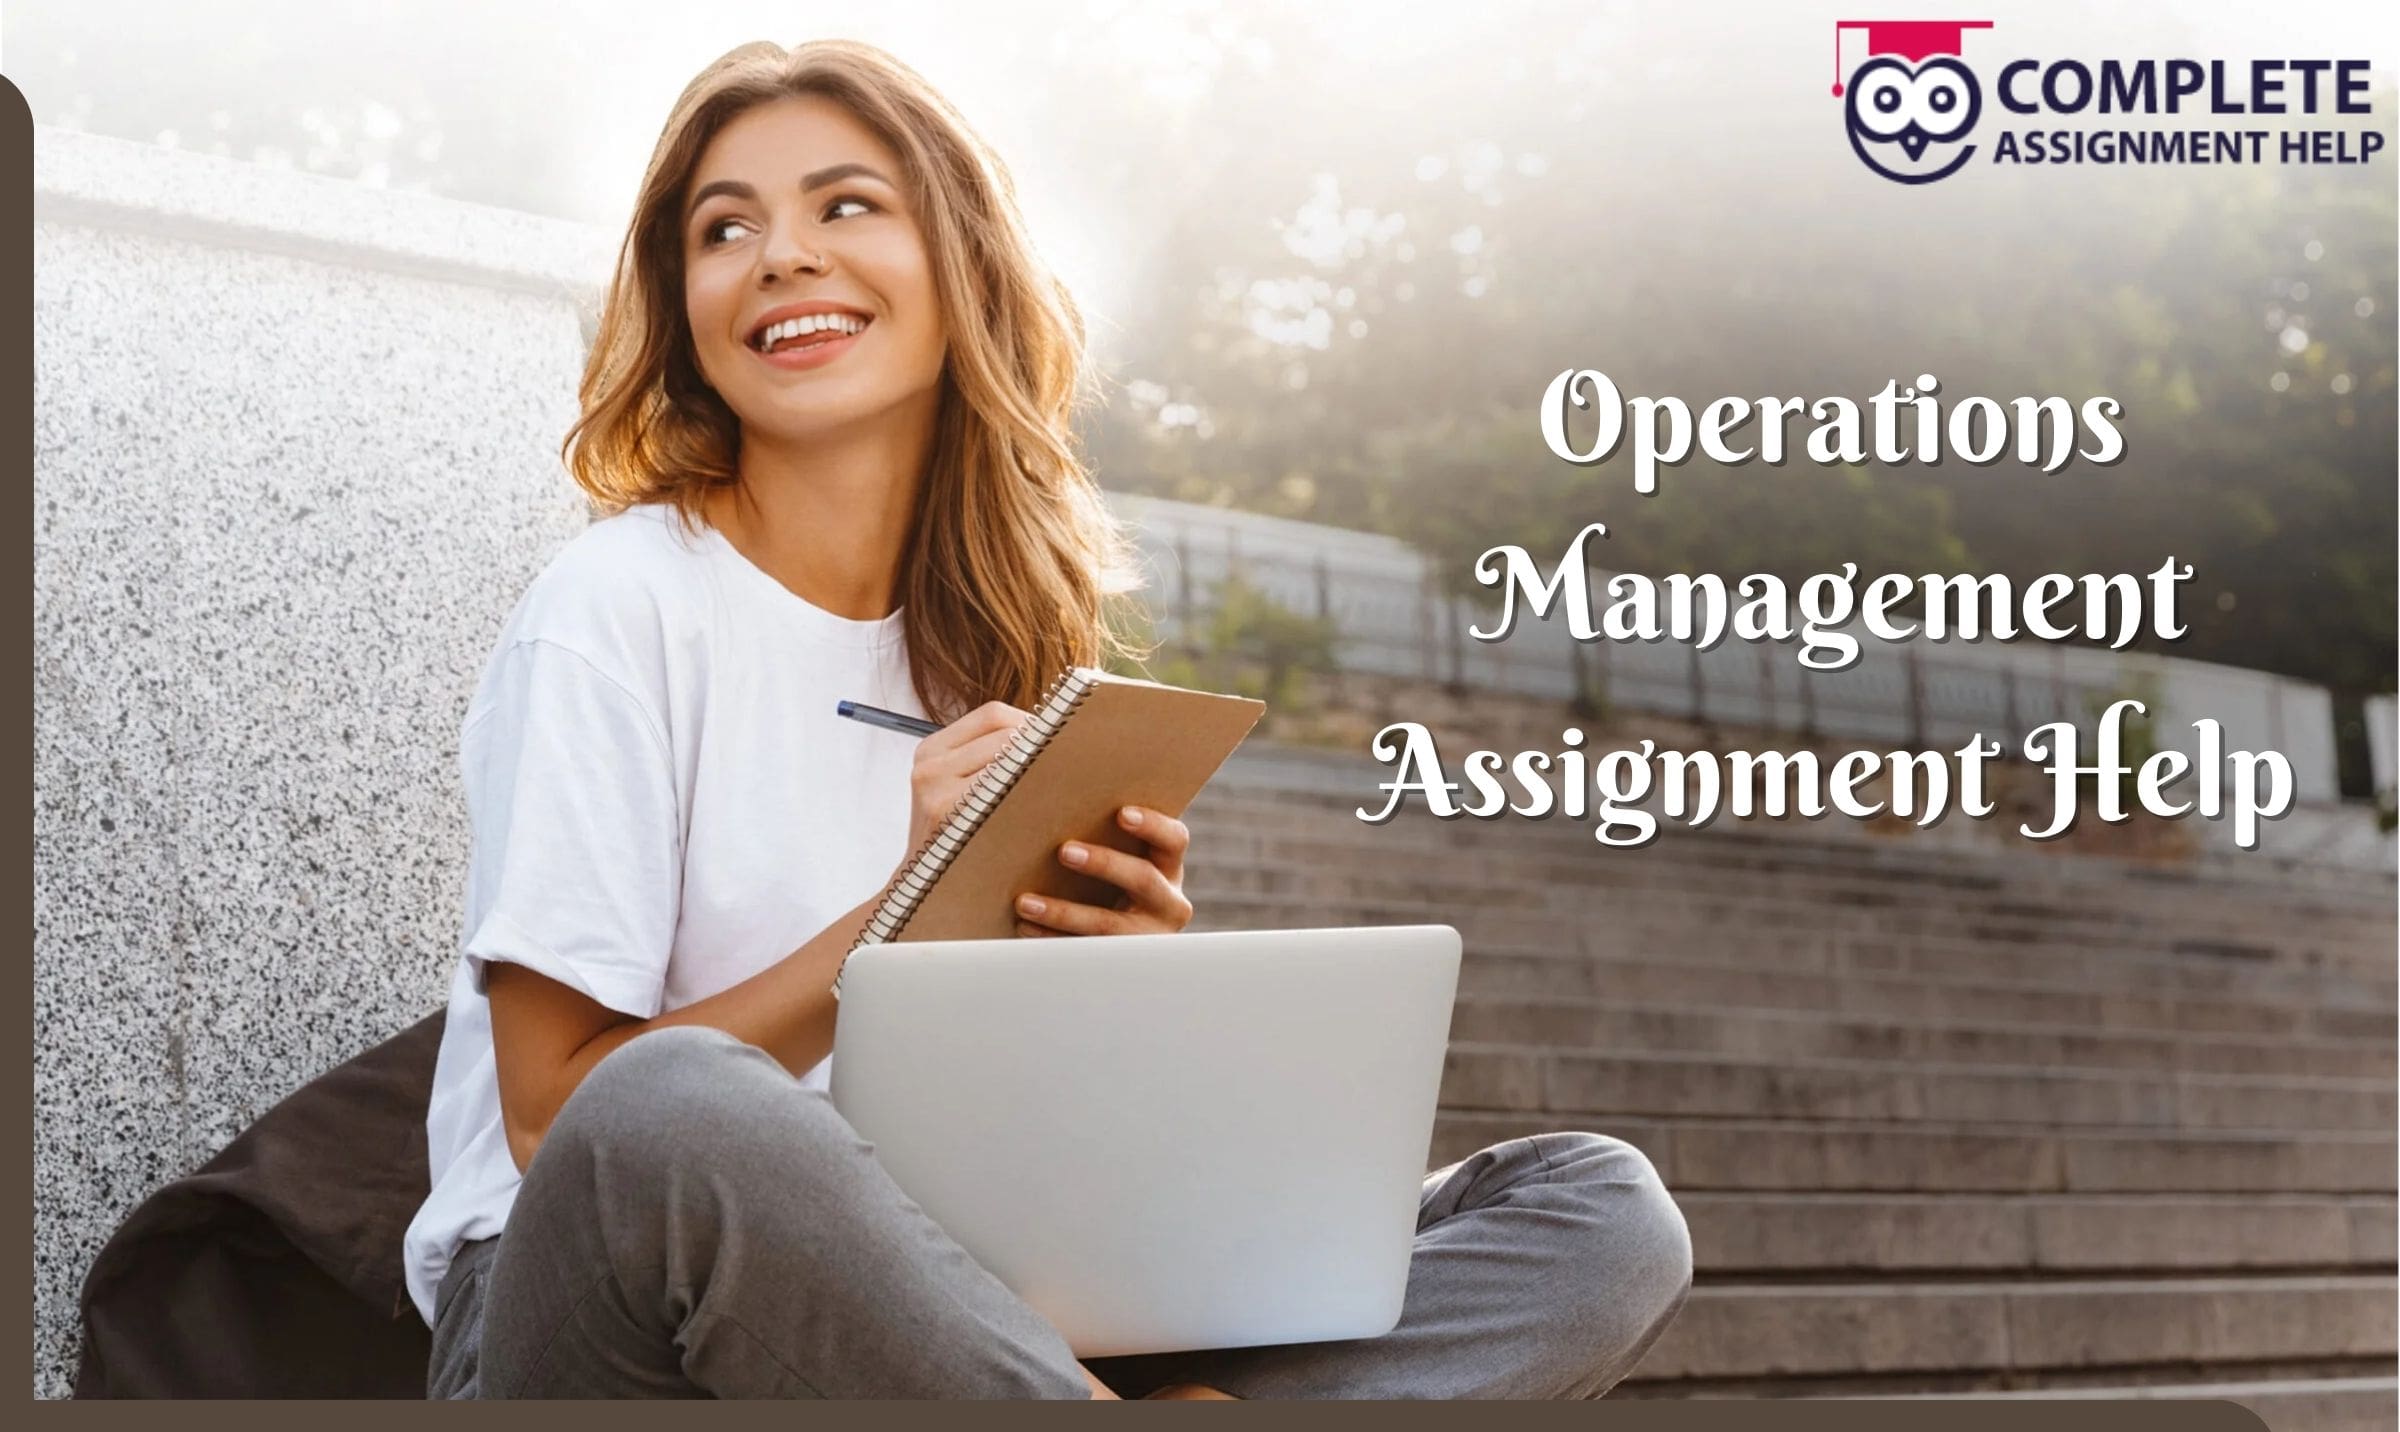 Operations Management Assignment Help: Critical to Organizational Excellence!